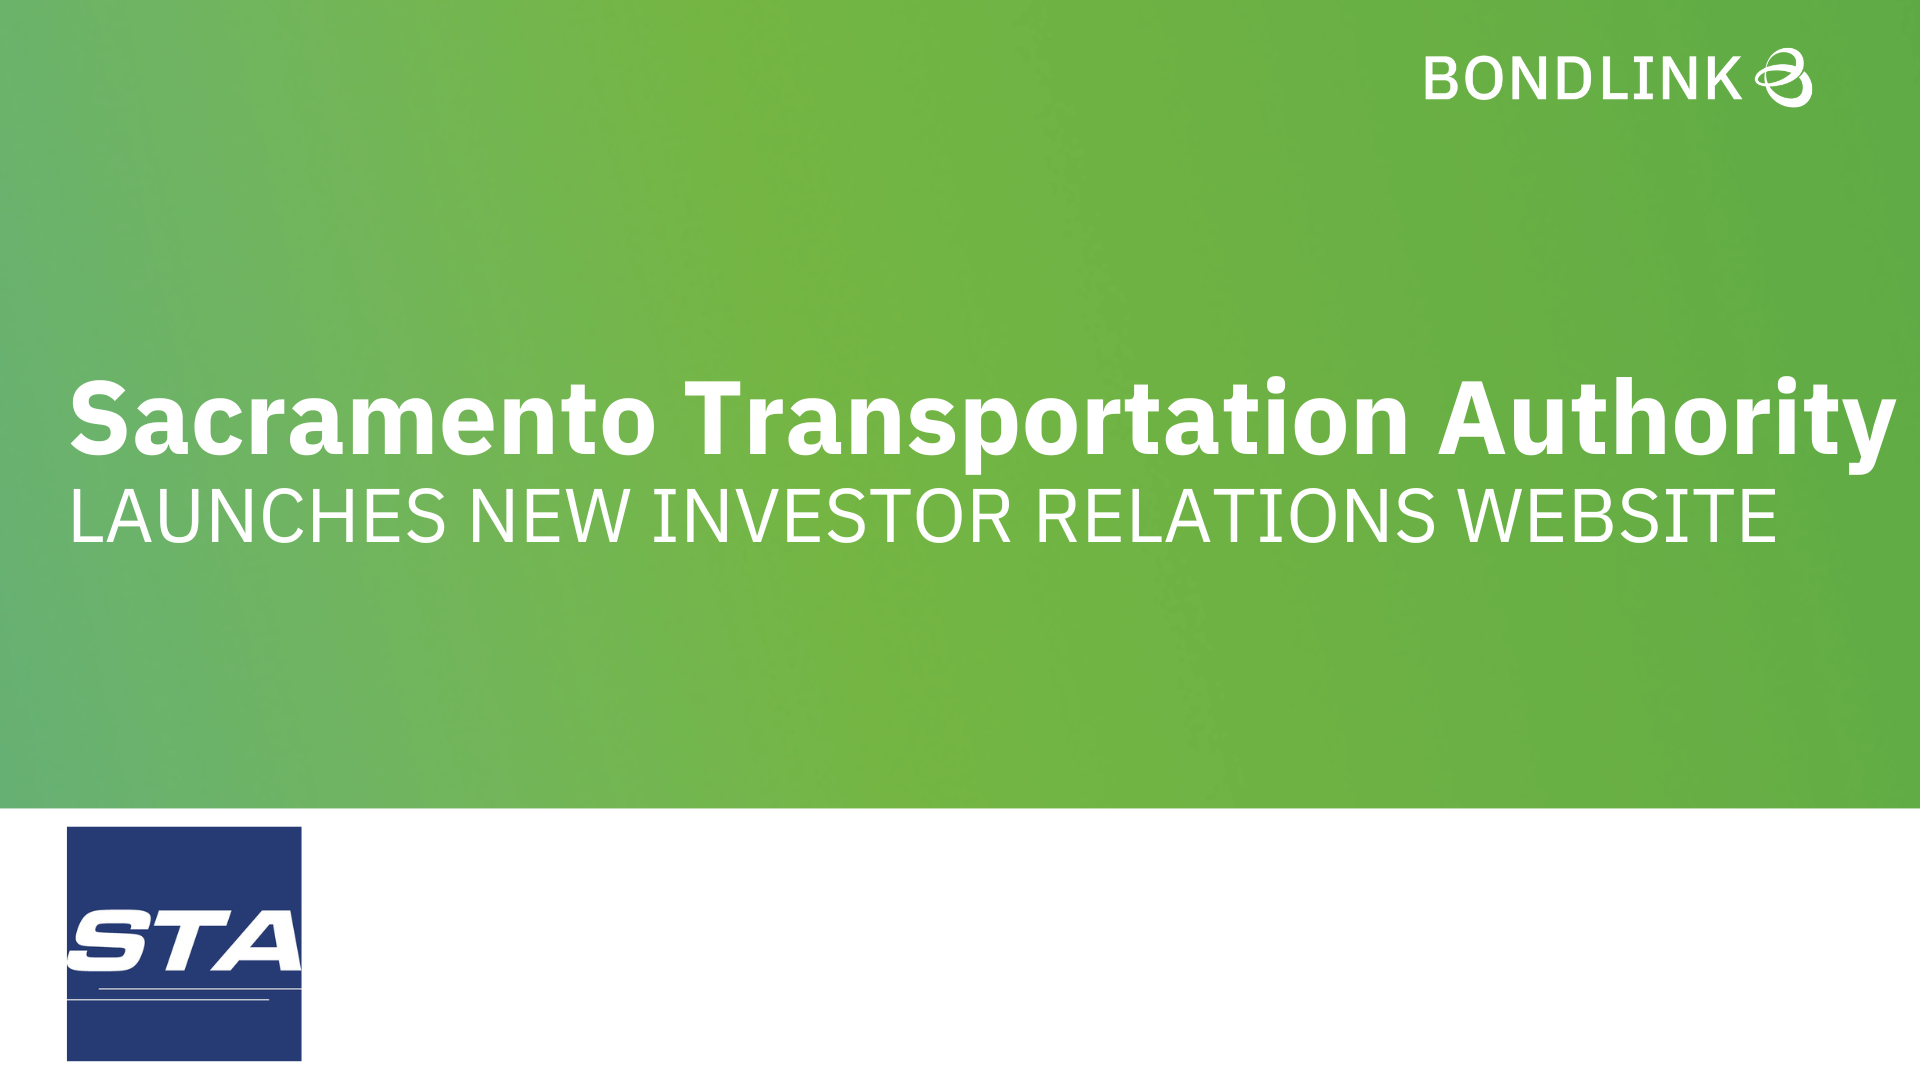 Sacramento Transportation Authority Highlights Financial Performance & Project Updates with BondLink